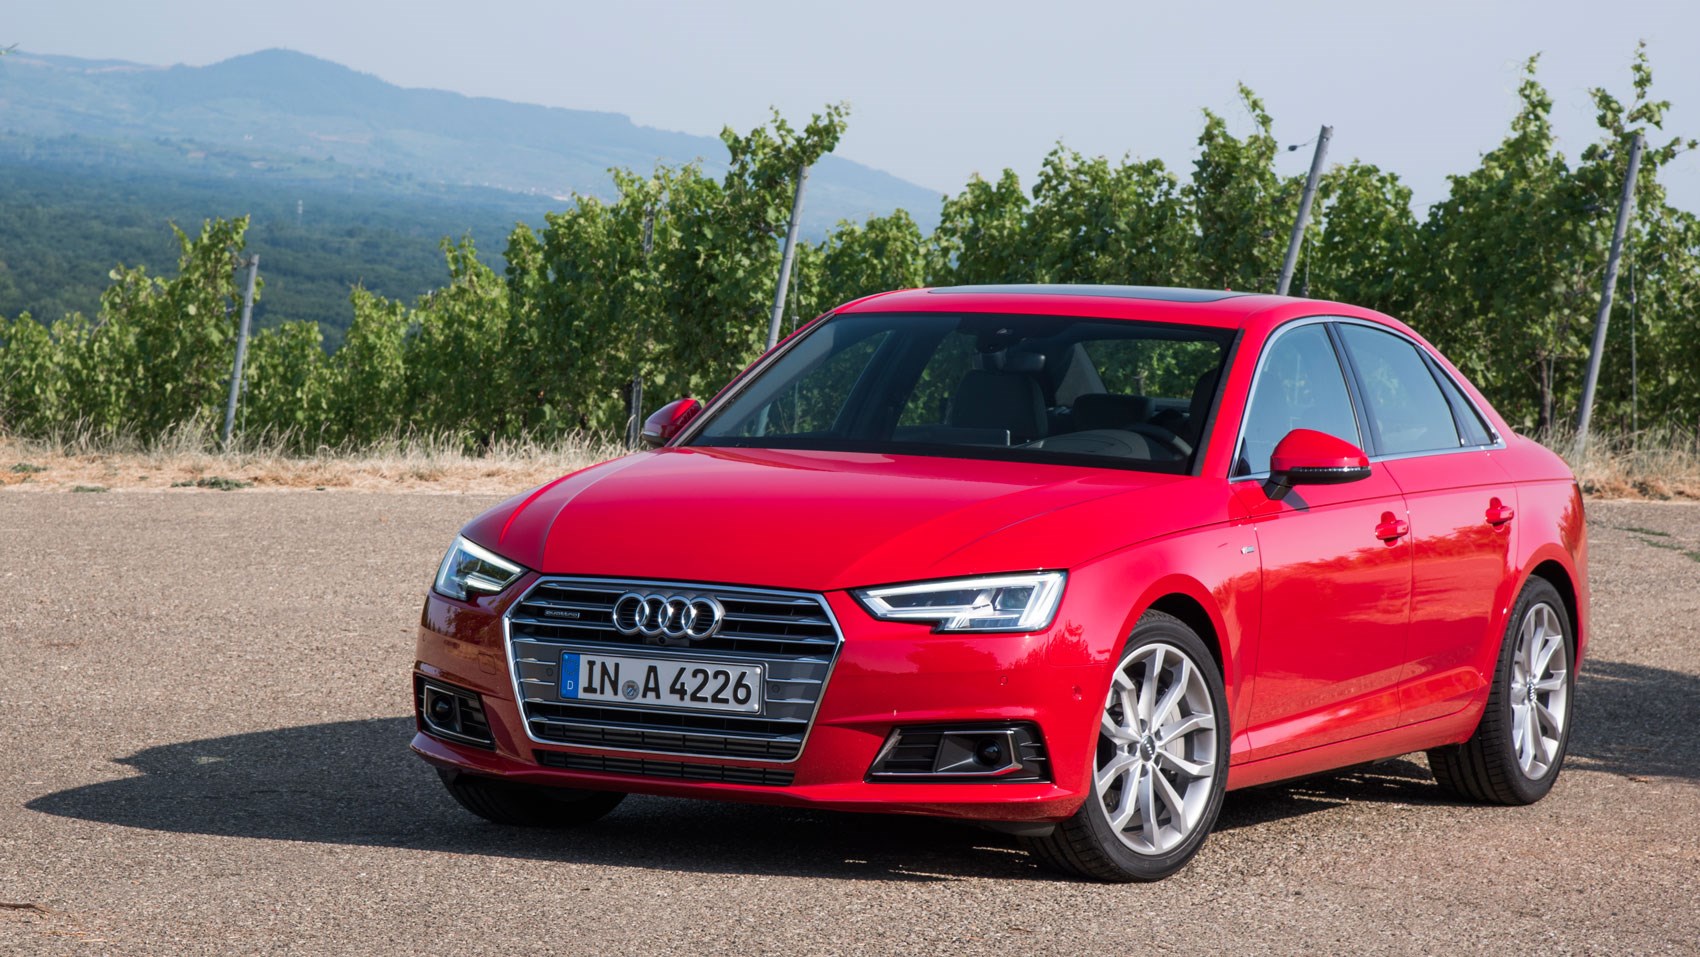 Audi A4 2016 Prototype Review By CAR Magazine